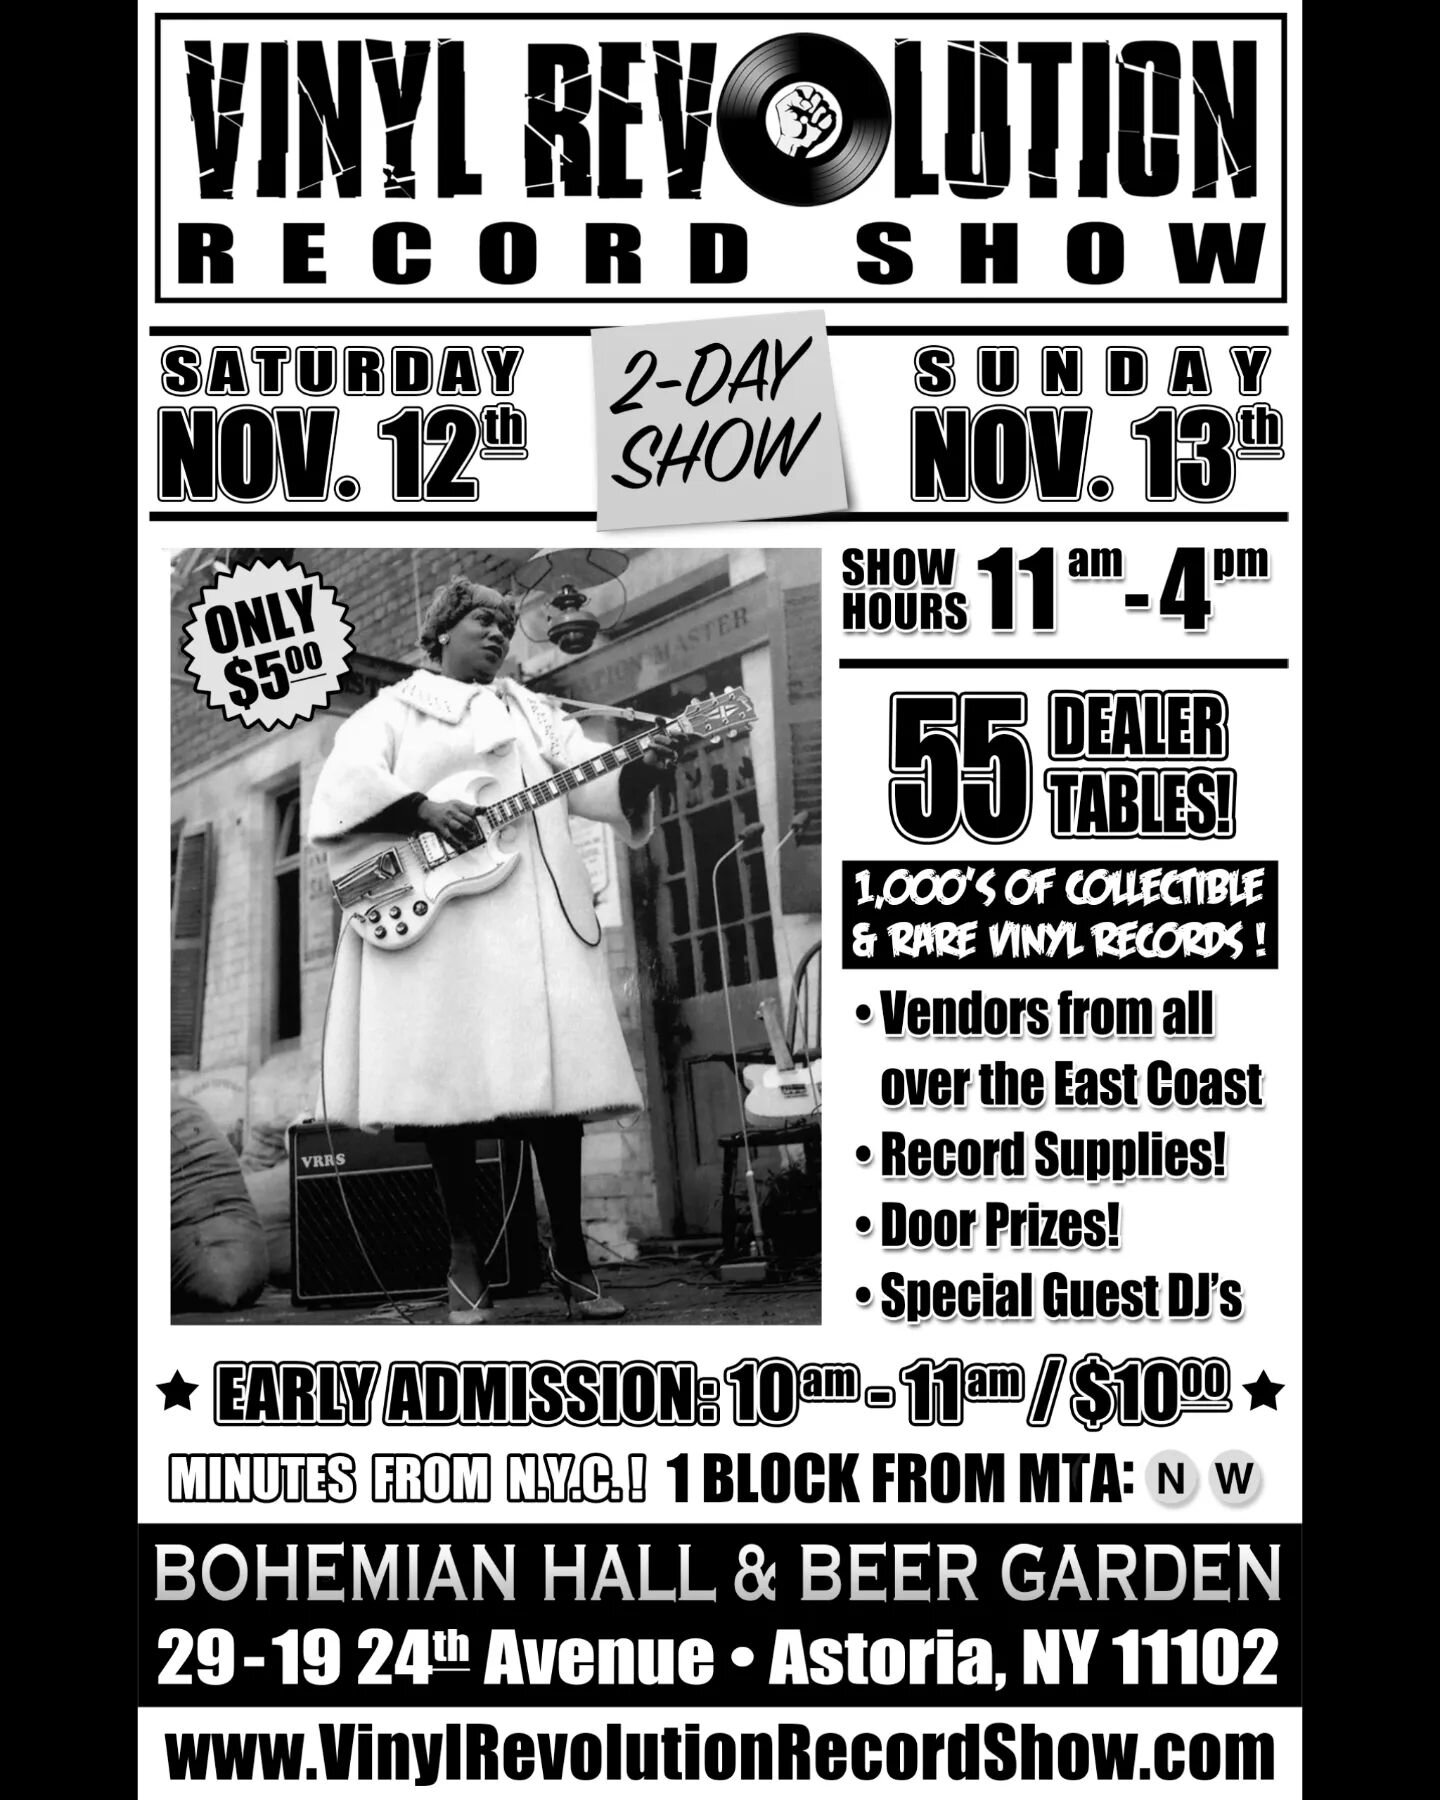 ONLY A FEW DAYS AWAY! 

SATURDAY, NOVEMBER 12th &amp; 
SUNDAY, NOVEMBER 13th 2022

The Vinyl Revolution Record Show is back at Bohemian Hall &amp; Beer Garden for their first ever full weekend event!&nbsp;

TWO rooms &bull; 60 dealer tables &bull; 
D